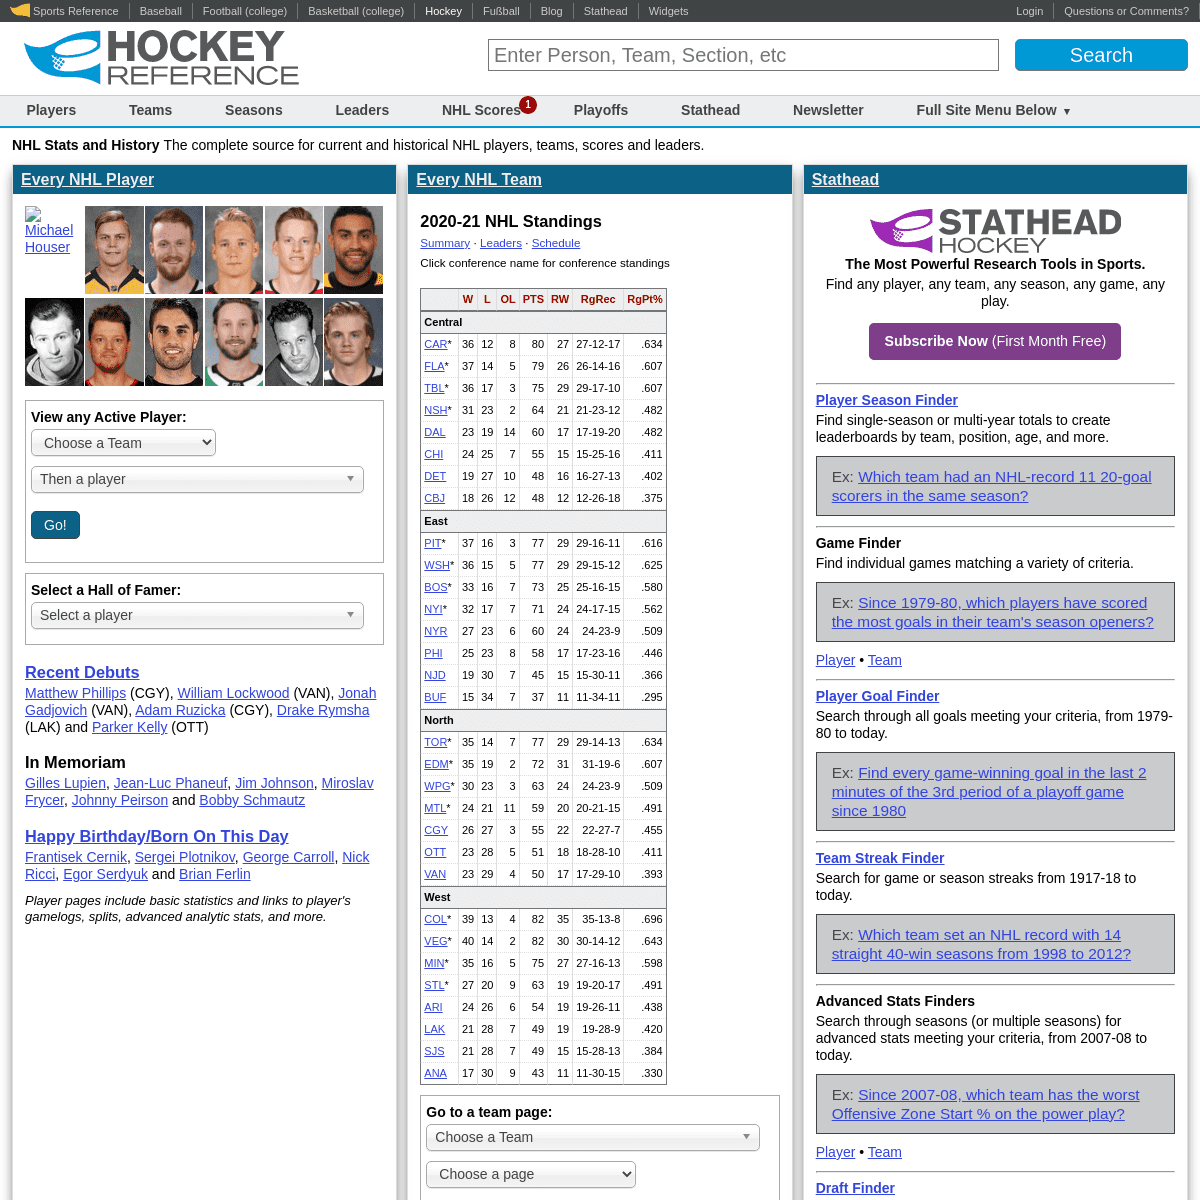 A complete backup of https://hockey-reference.com